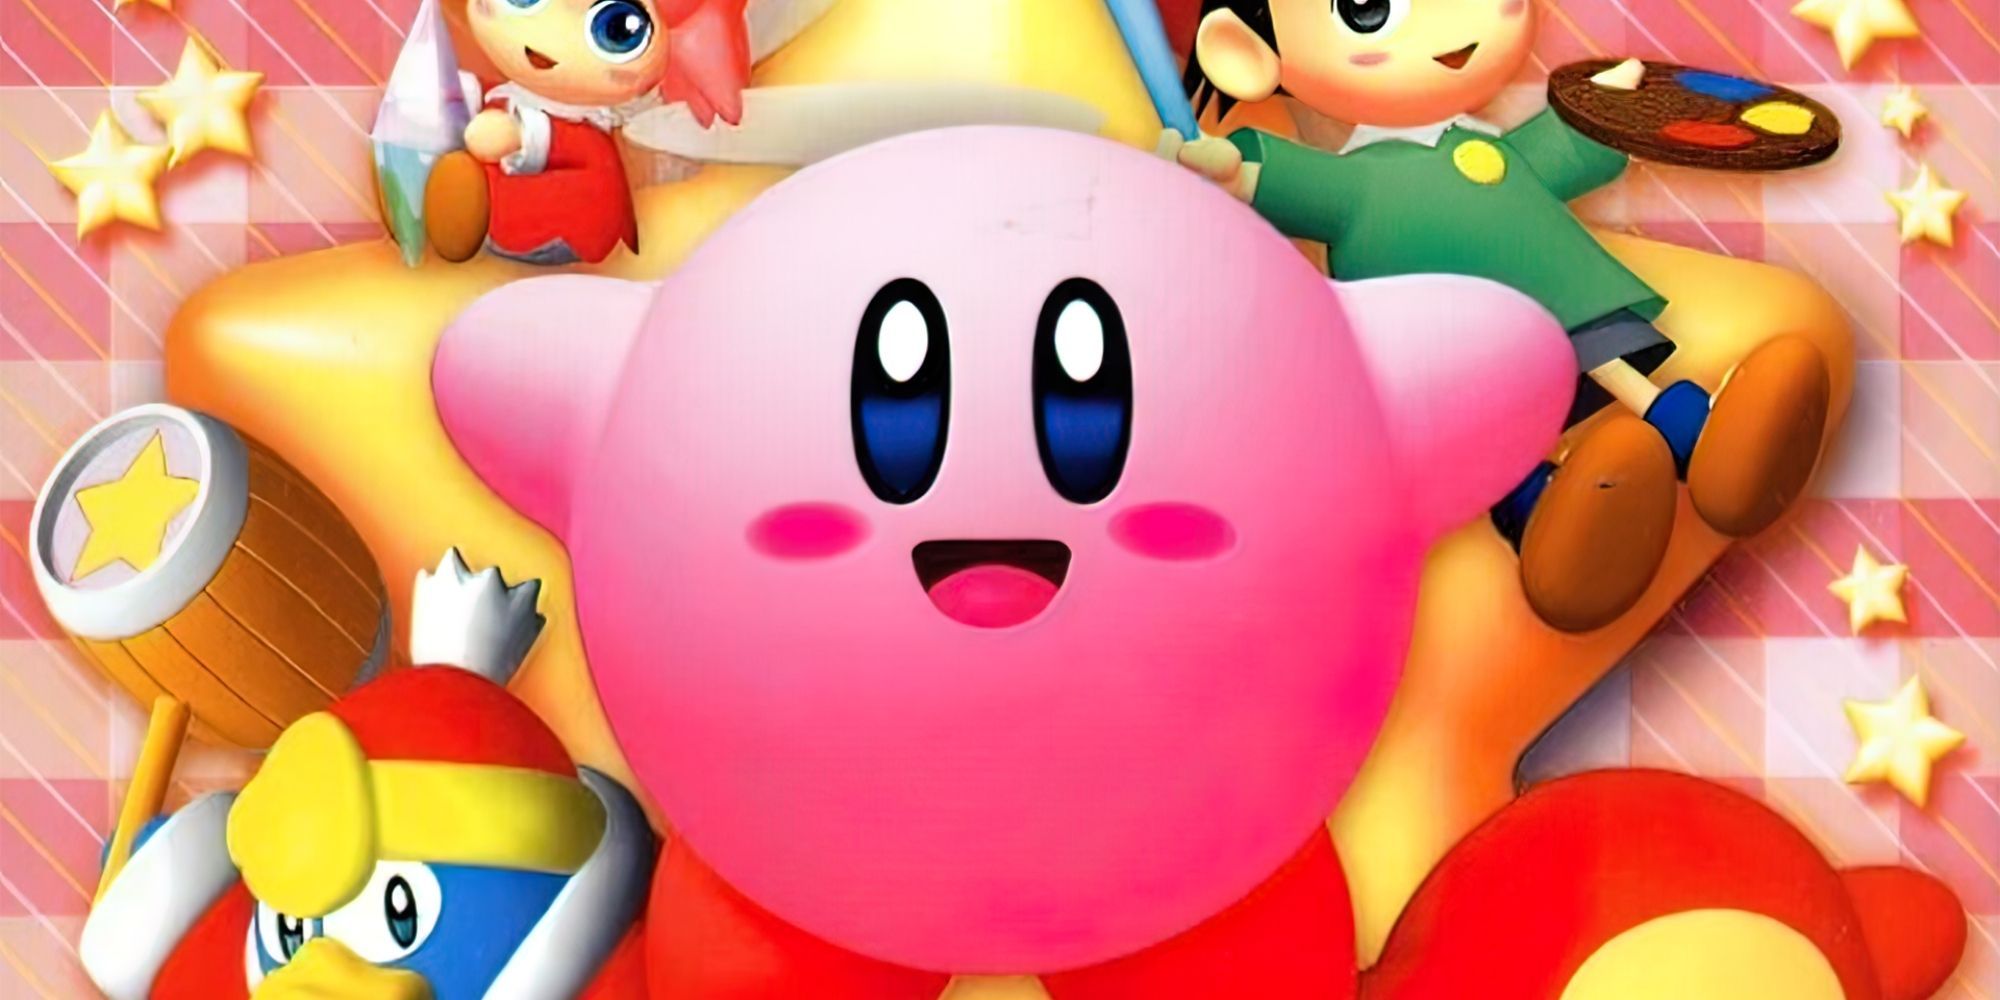 Kirby, King Dedede, Ribbon, and Adeleine pose in front of star